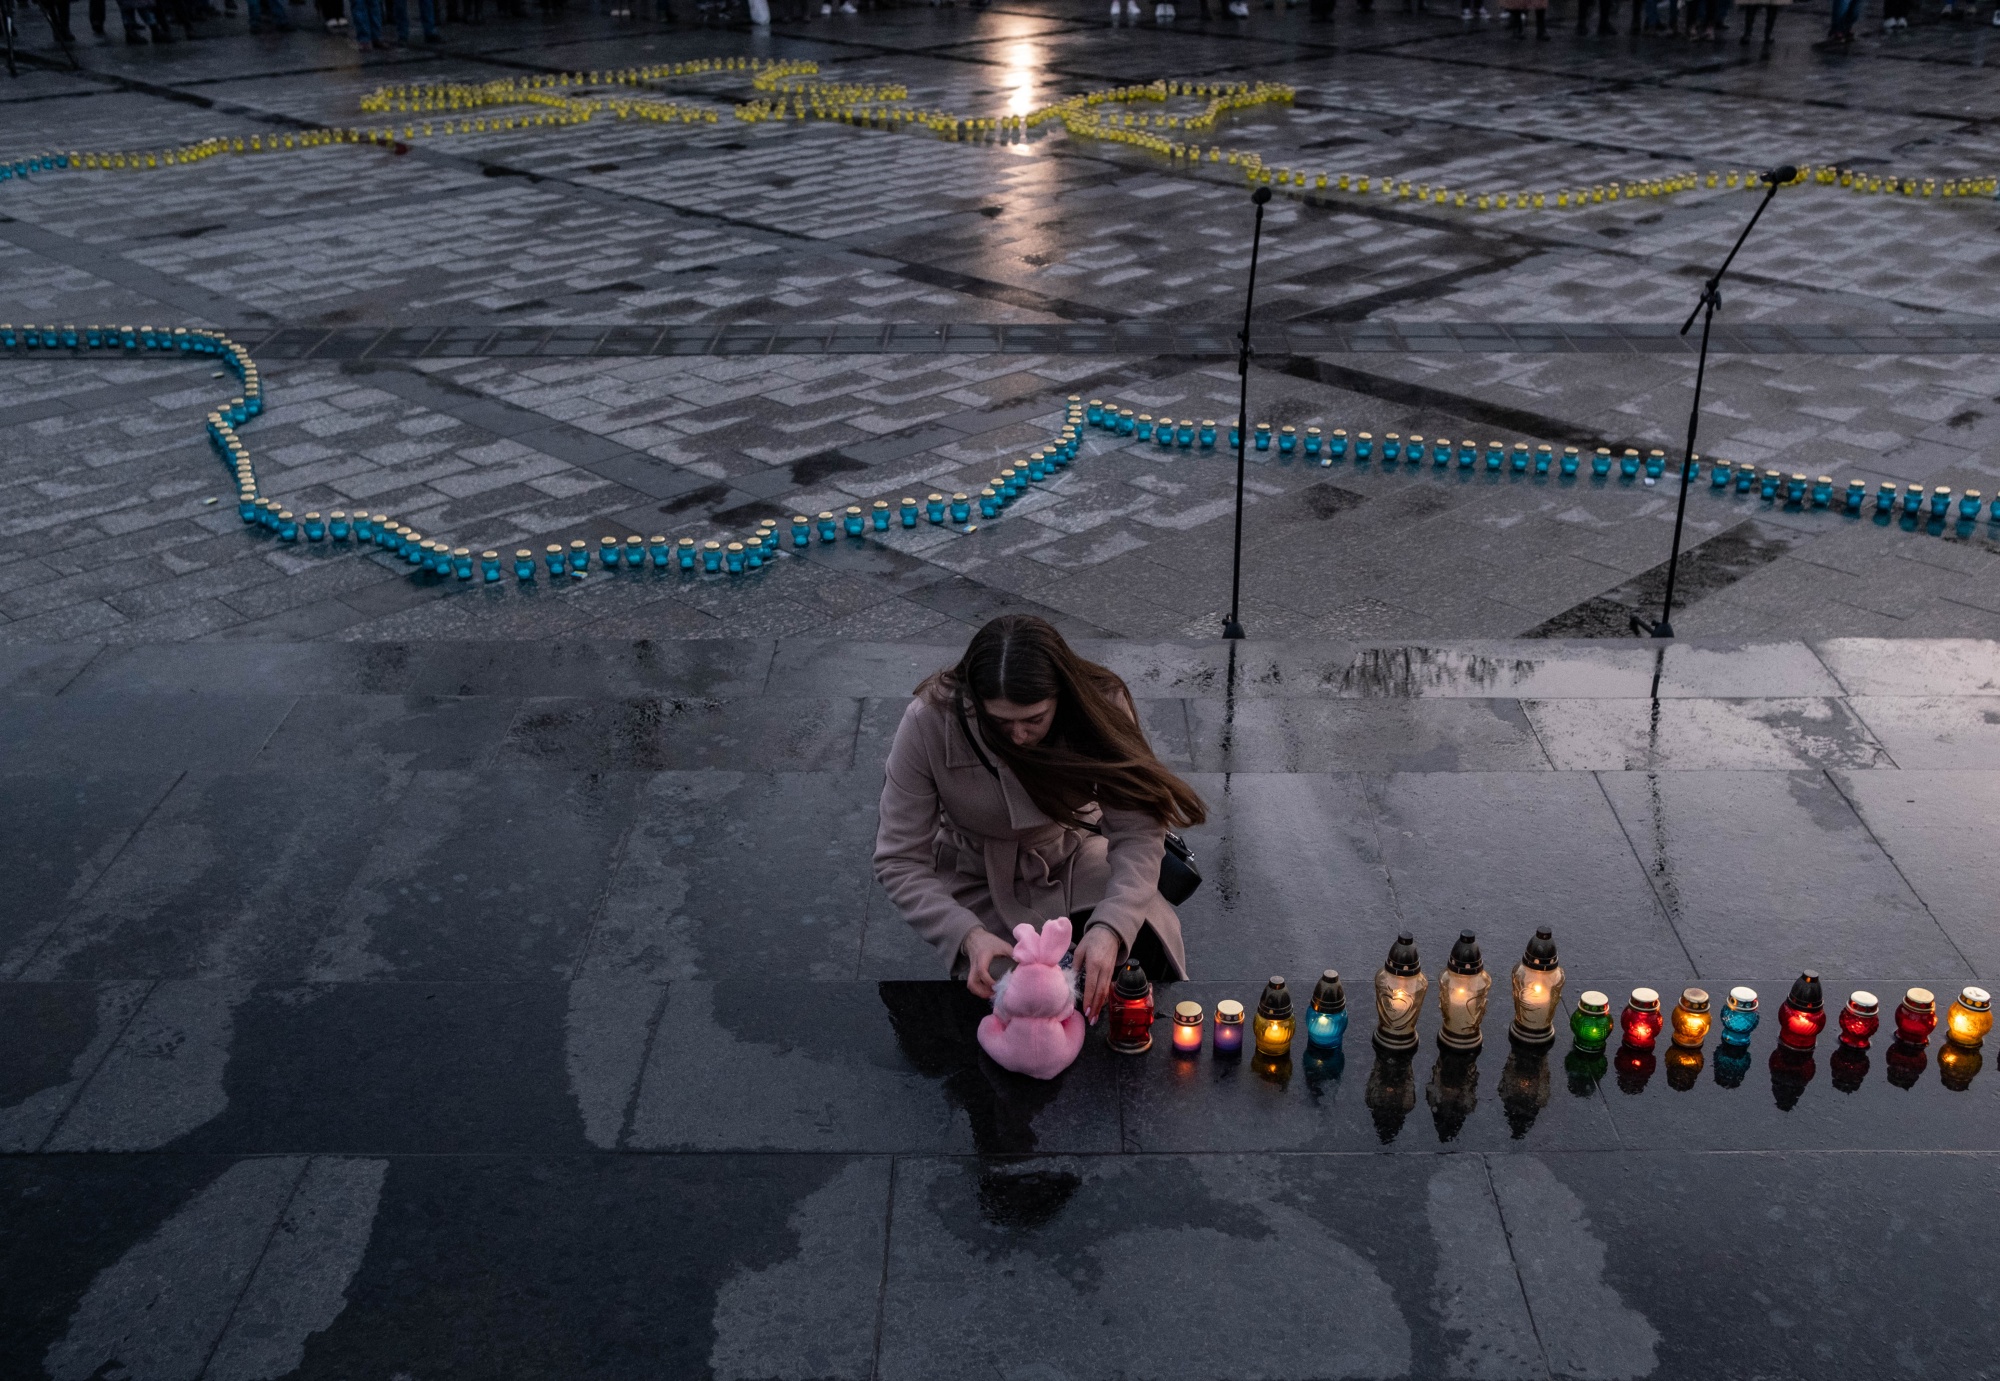 A candlelight vigil last week for Ukrainians who were massacred in the towns of Bucha and Irpin.